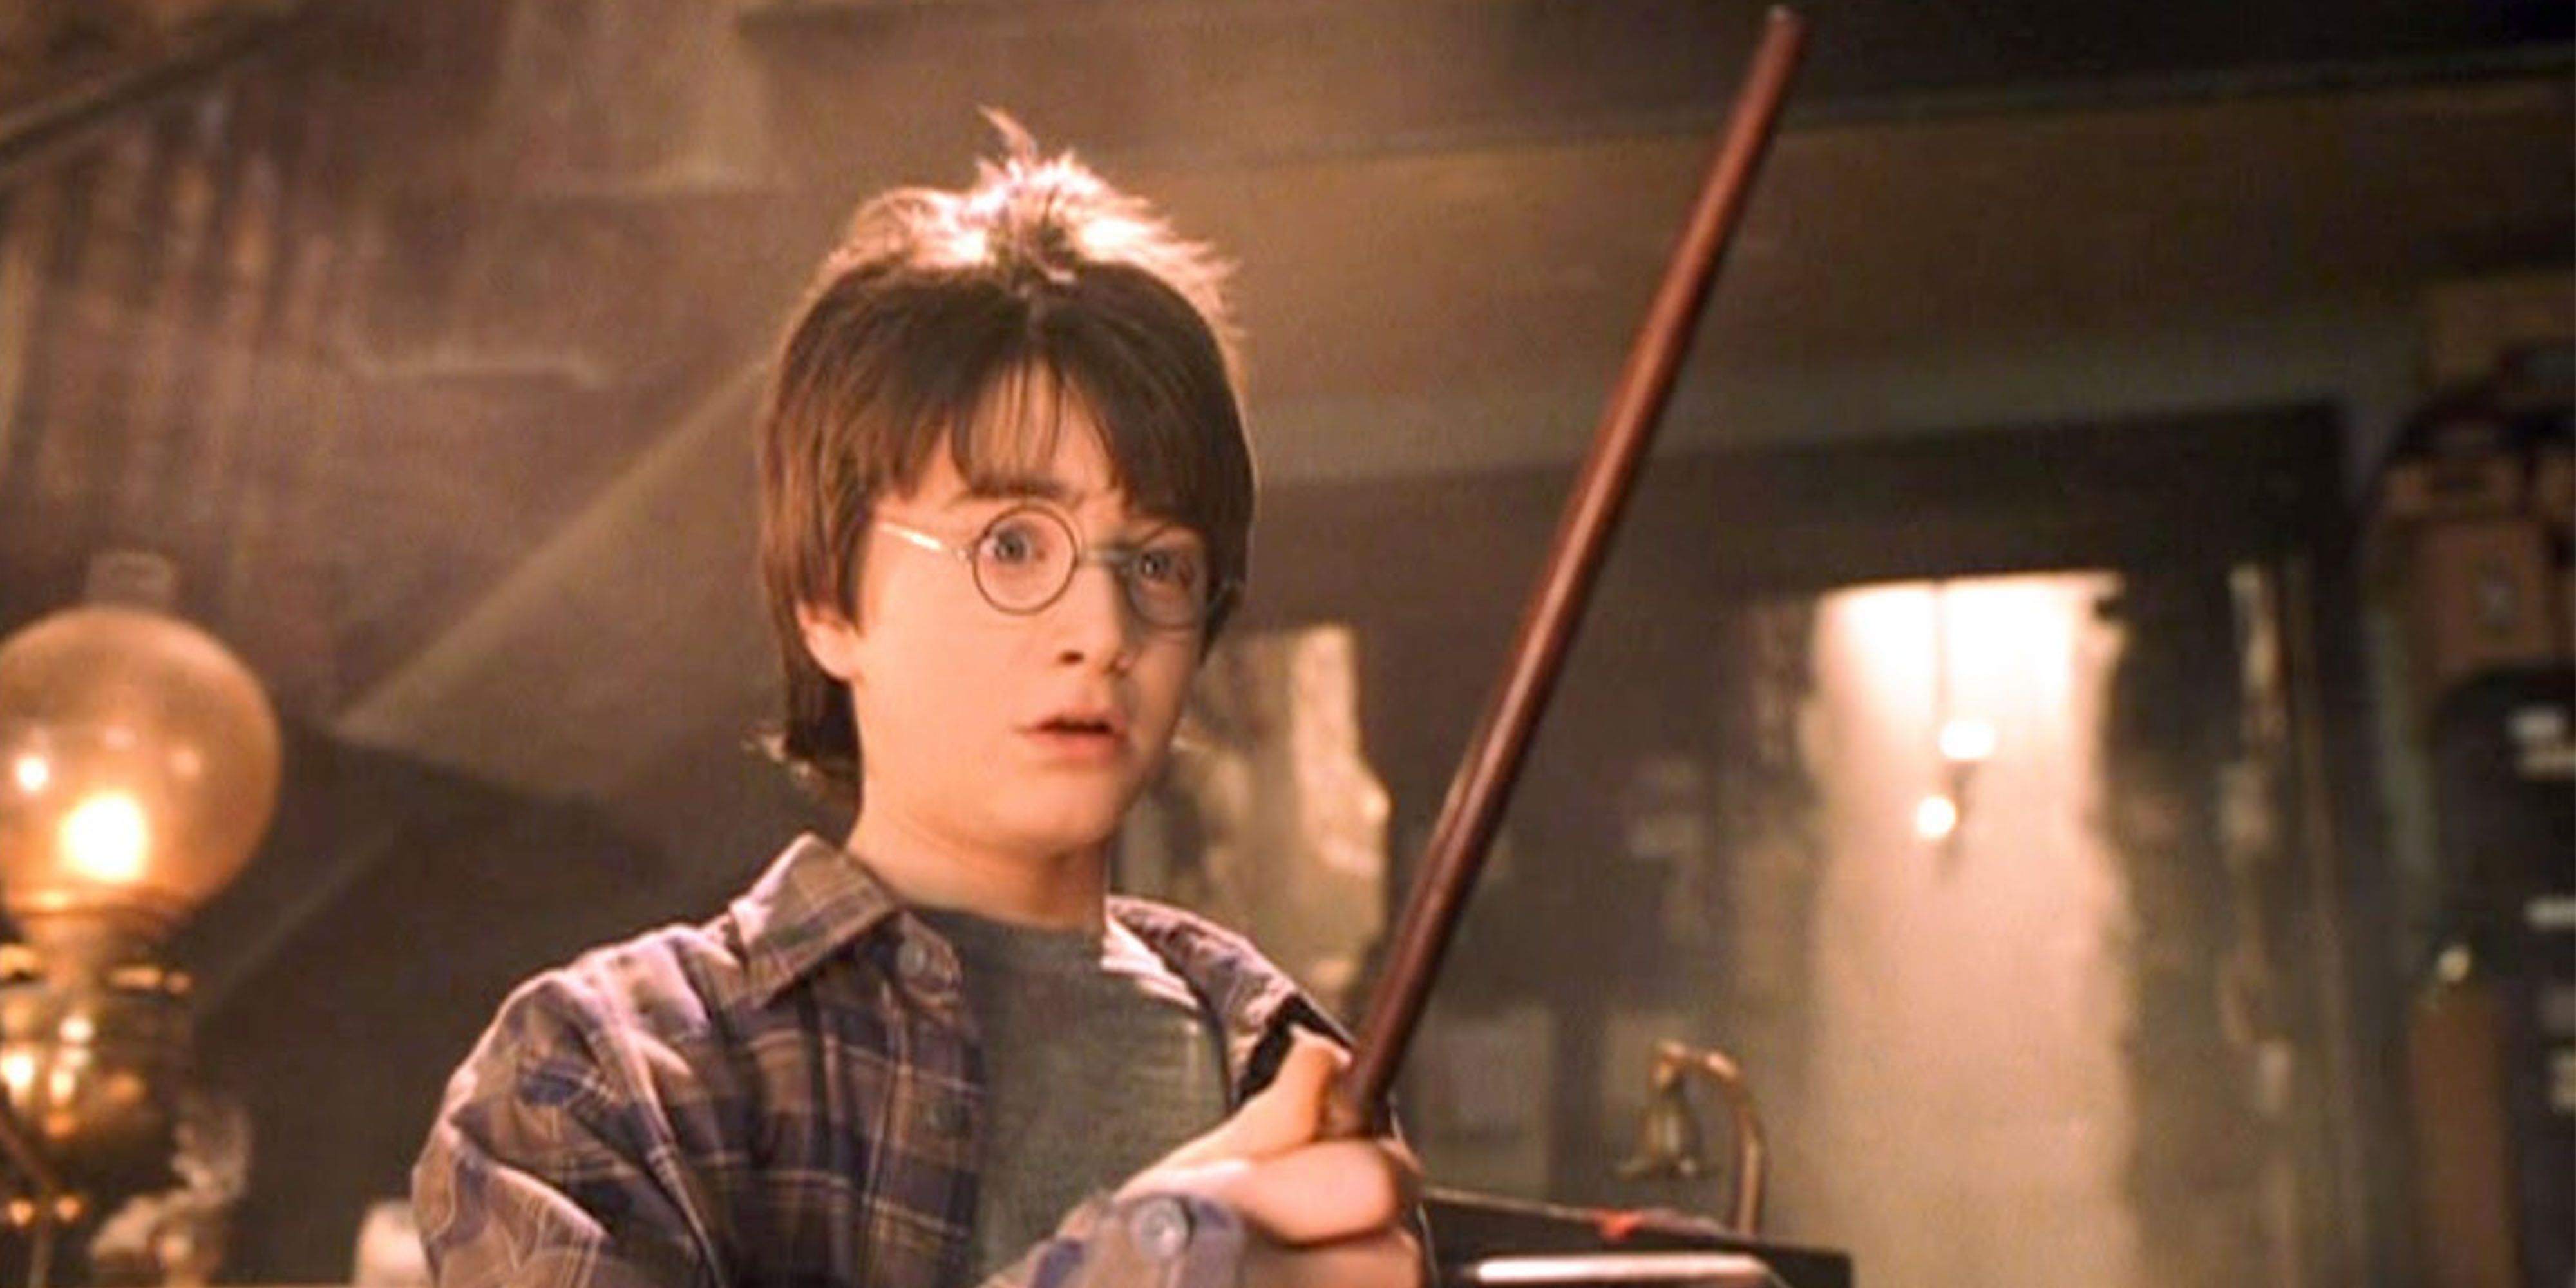 Harry finding his wand in Olivander's shop in The Sorcerer's Stone.